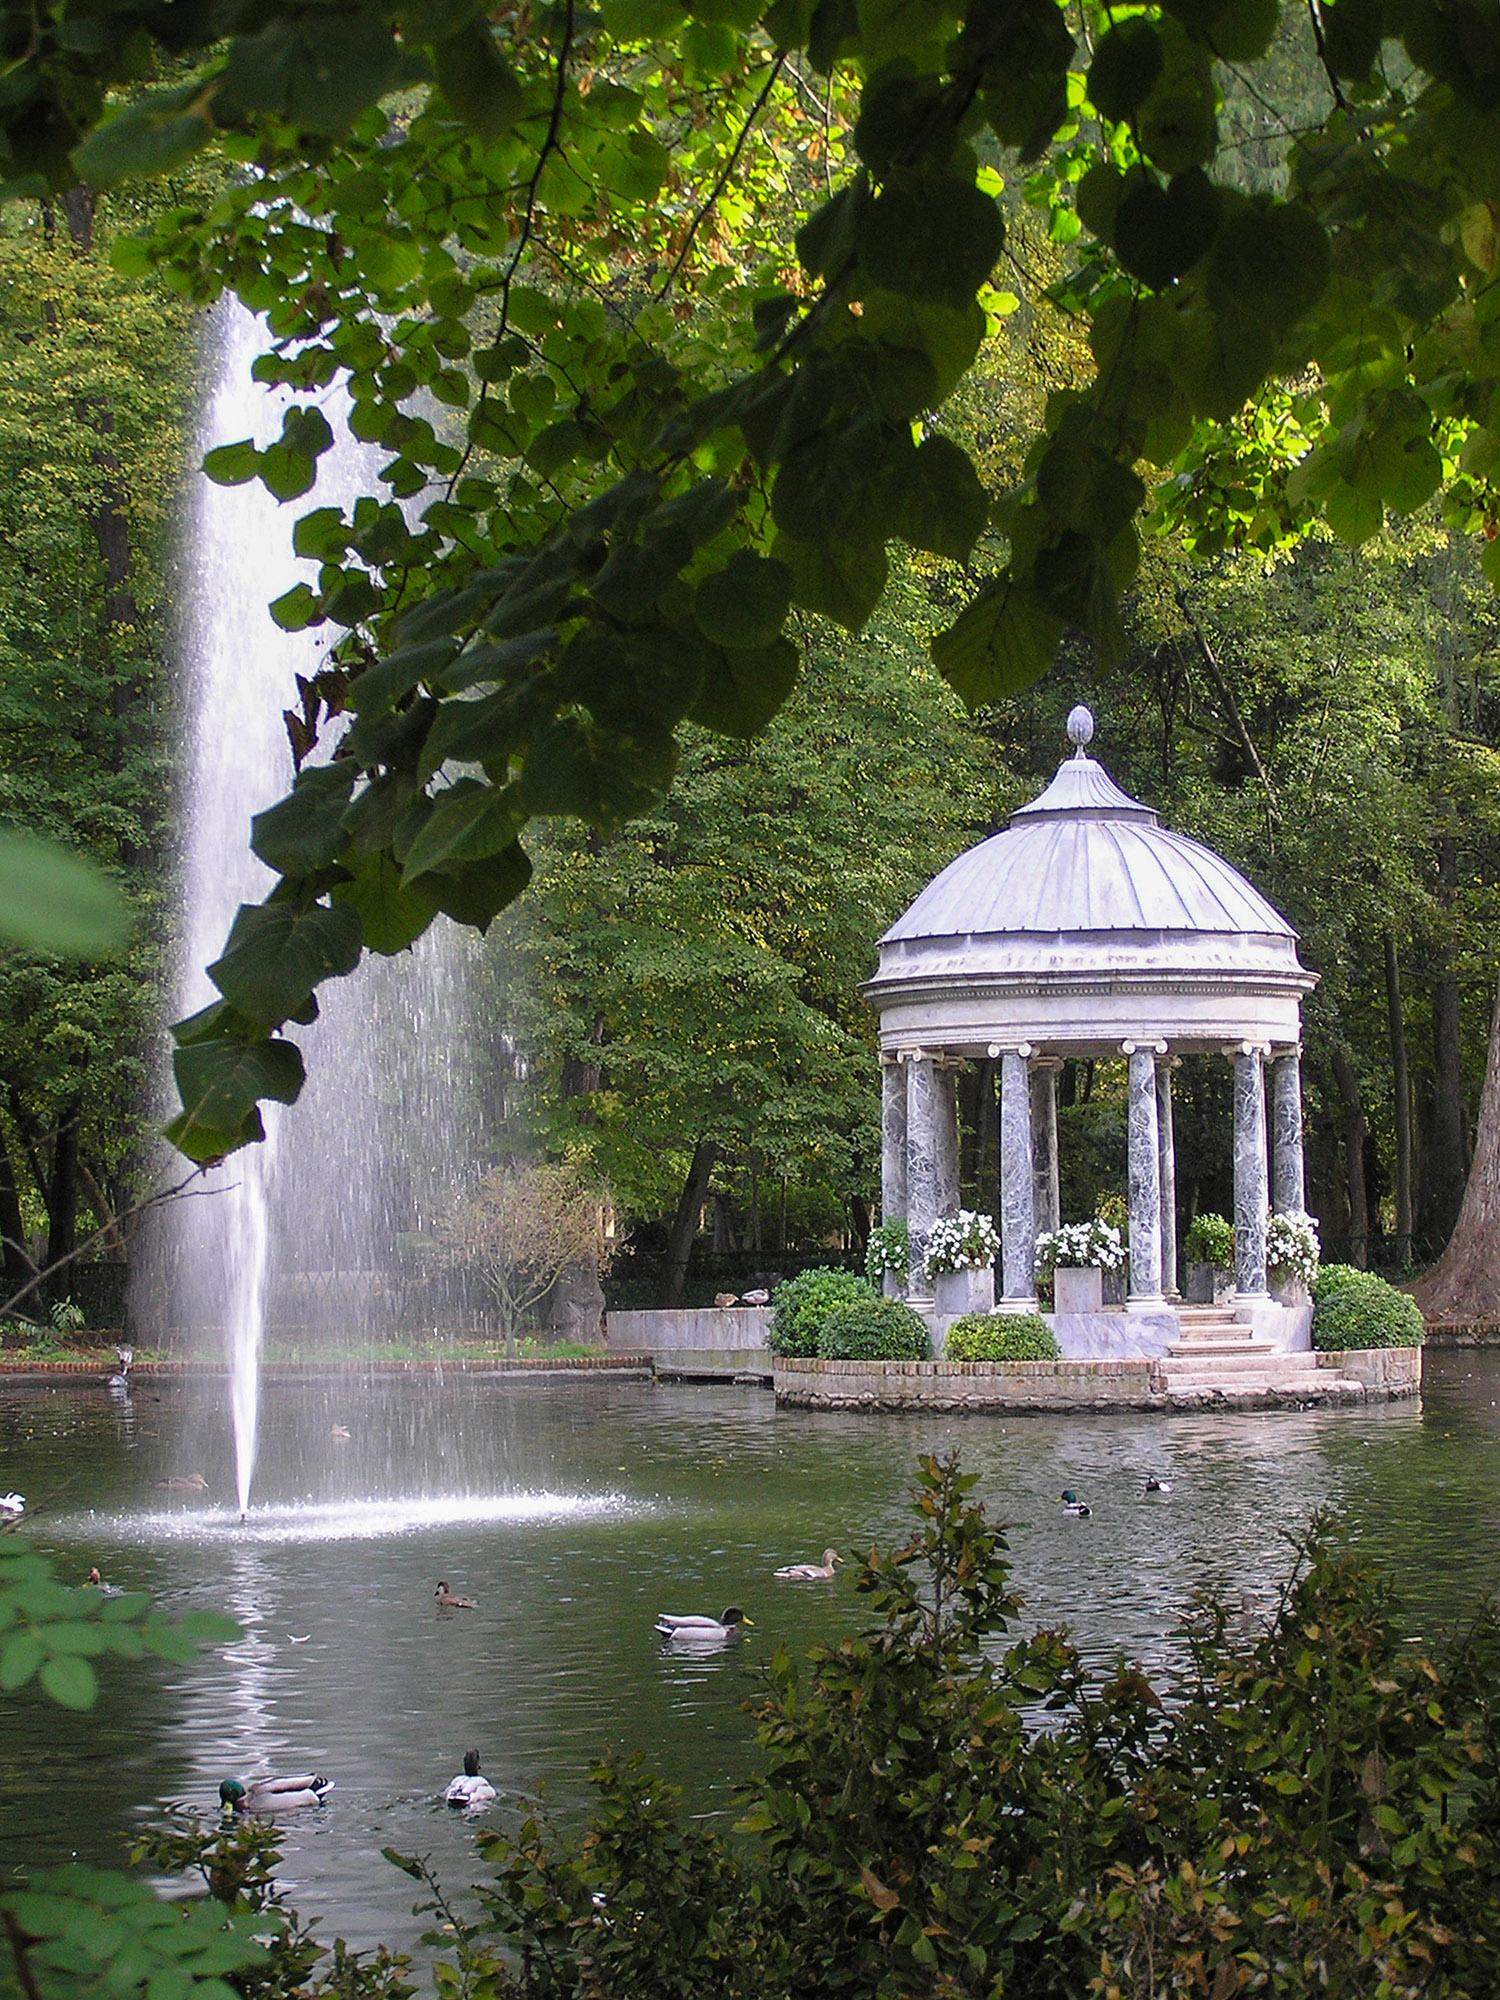 The Greek Pavilion in the Prince's Garden is one of the most important features in this landscape to the east of the palace. - © Antonio Castillo López